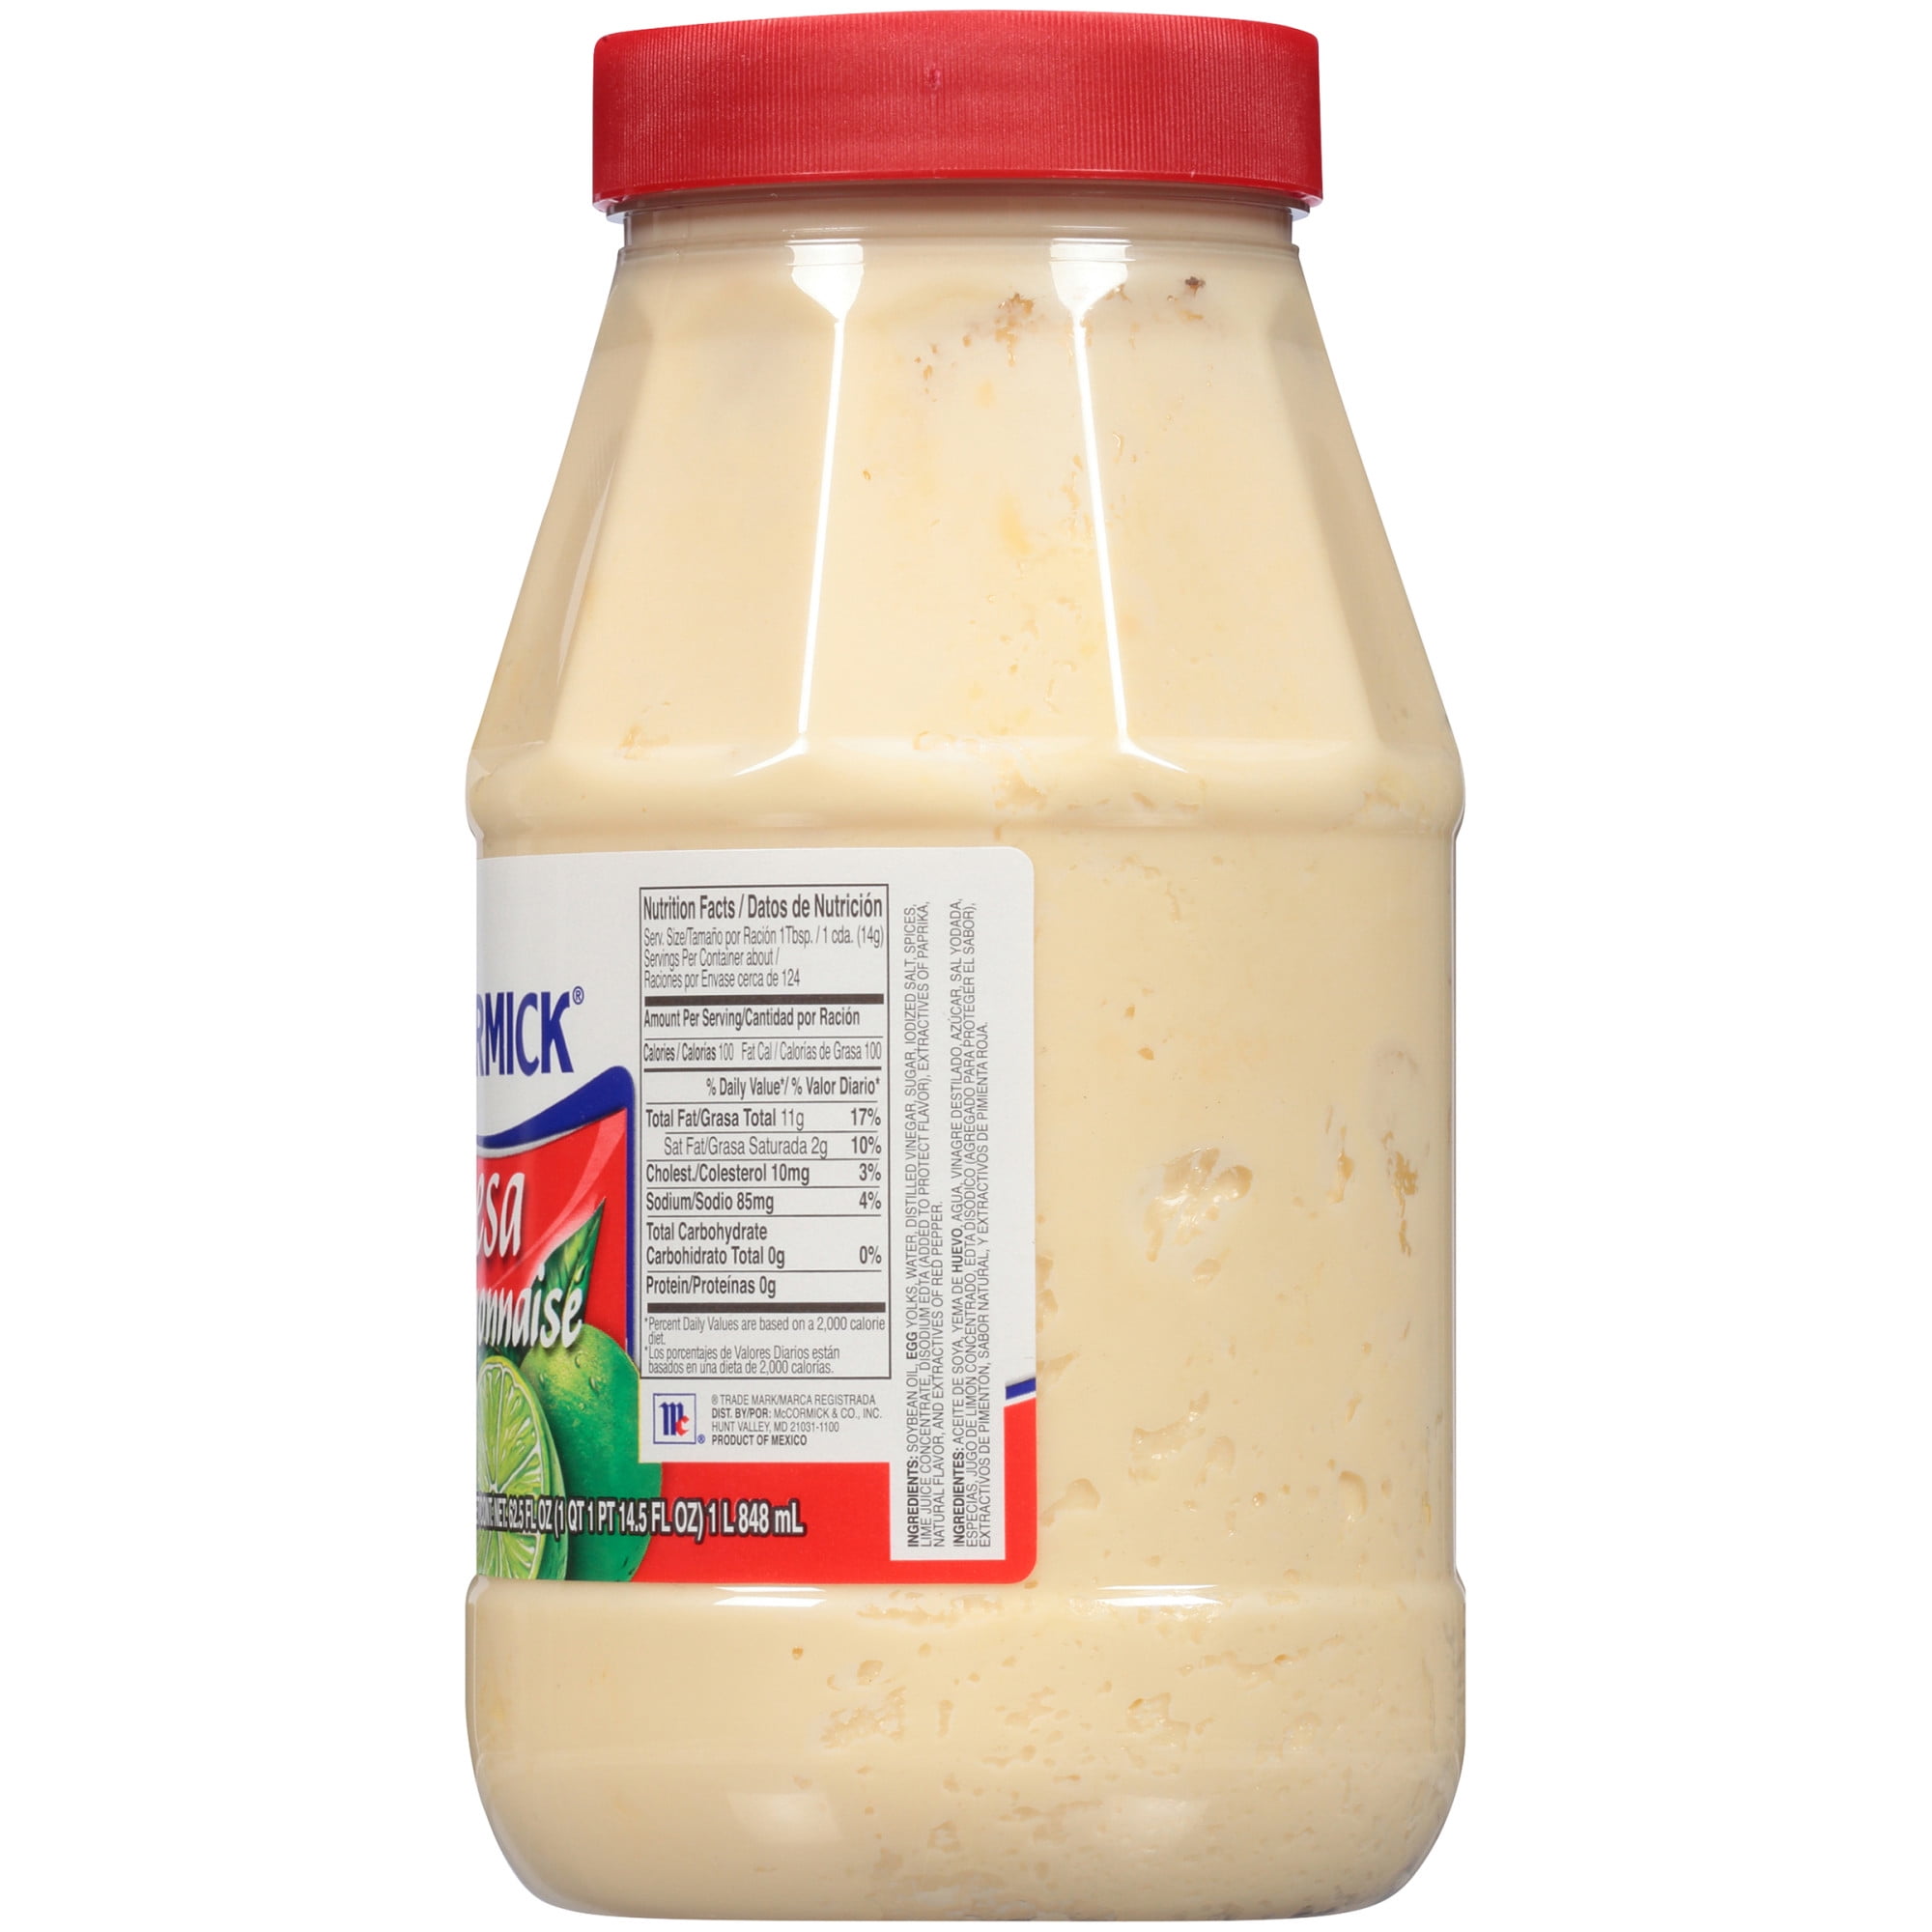 McCormick Mayonnaise with Lime Juice, 11.6 Ounce (Pack of 6)